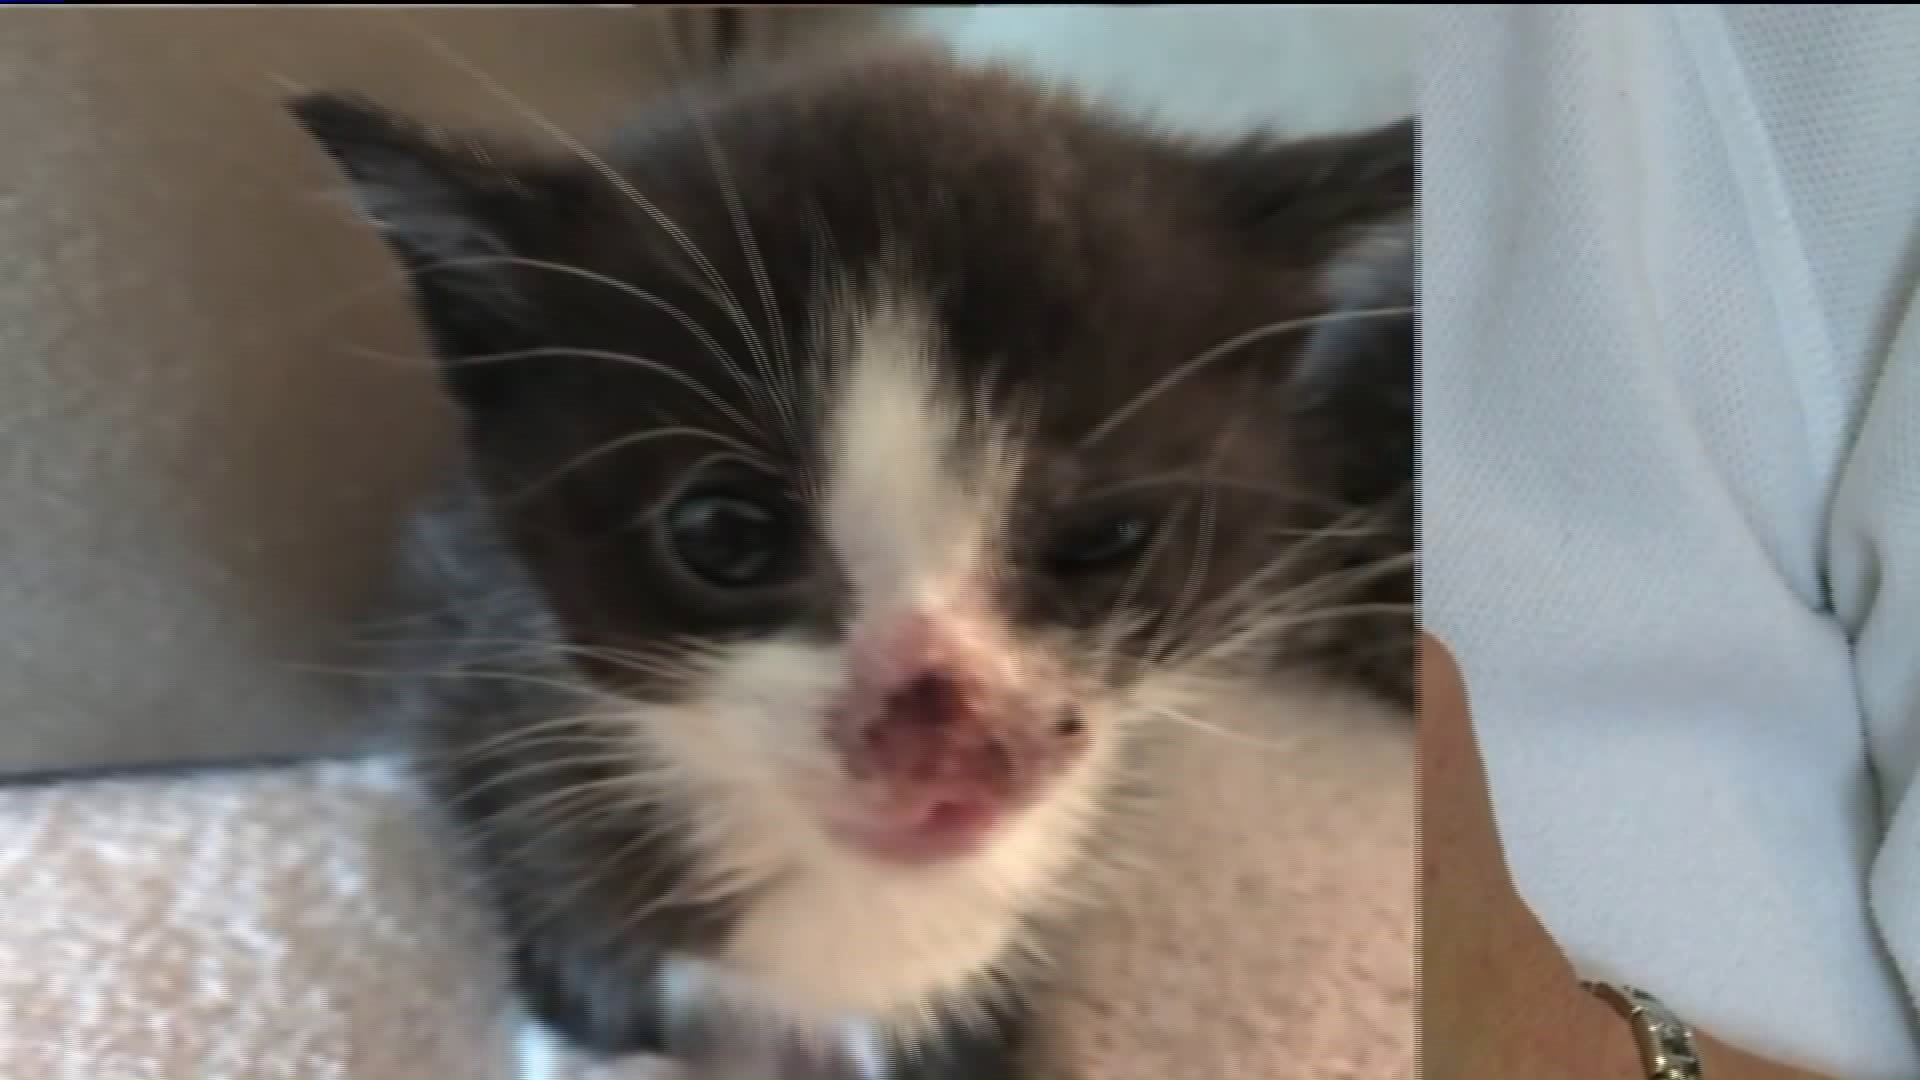 Kitten rescued after being thrown from a car in Waterbury